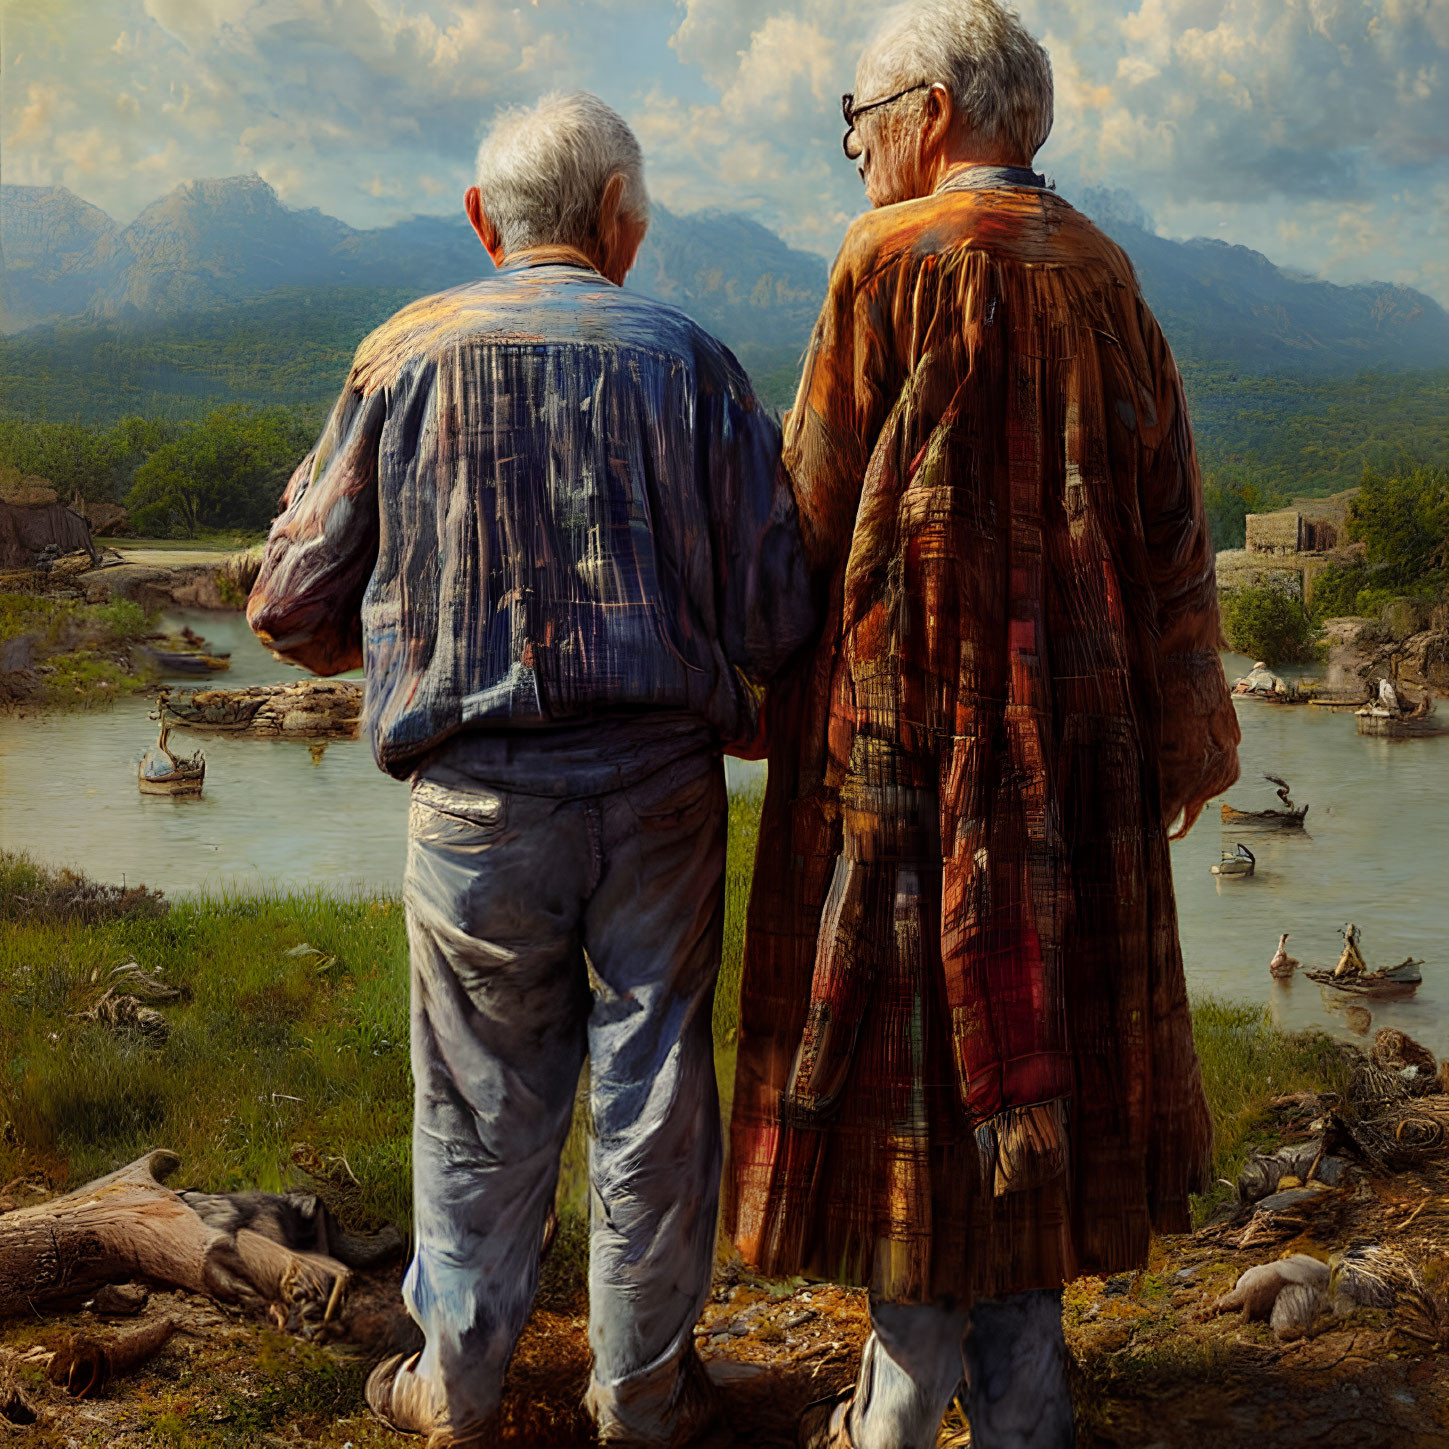 Elderly couple admiring river landscape with boats and mountains